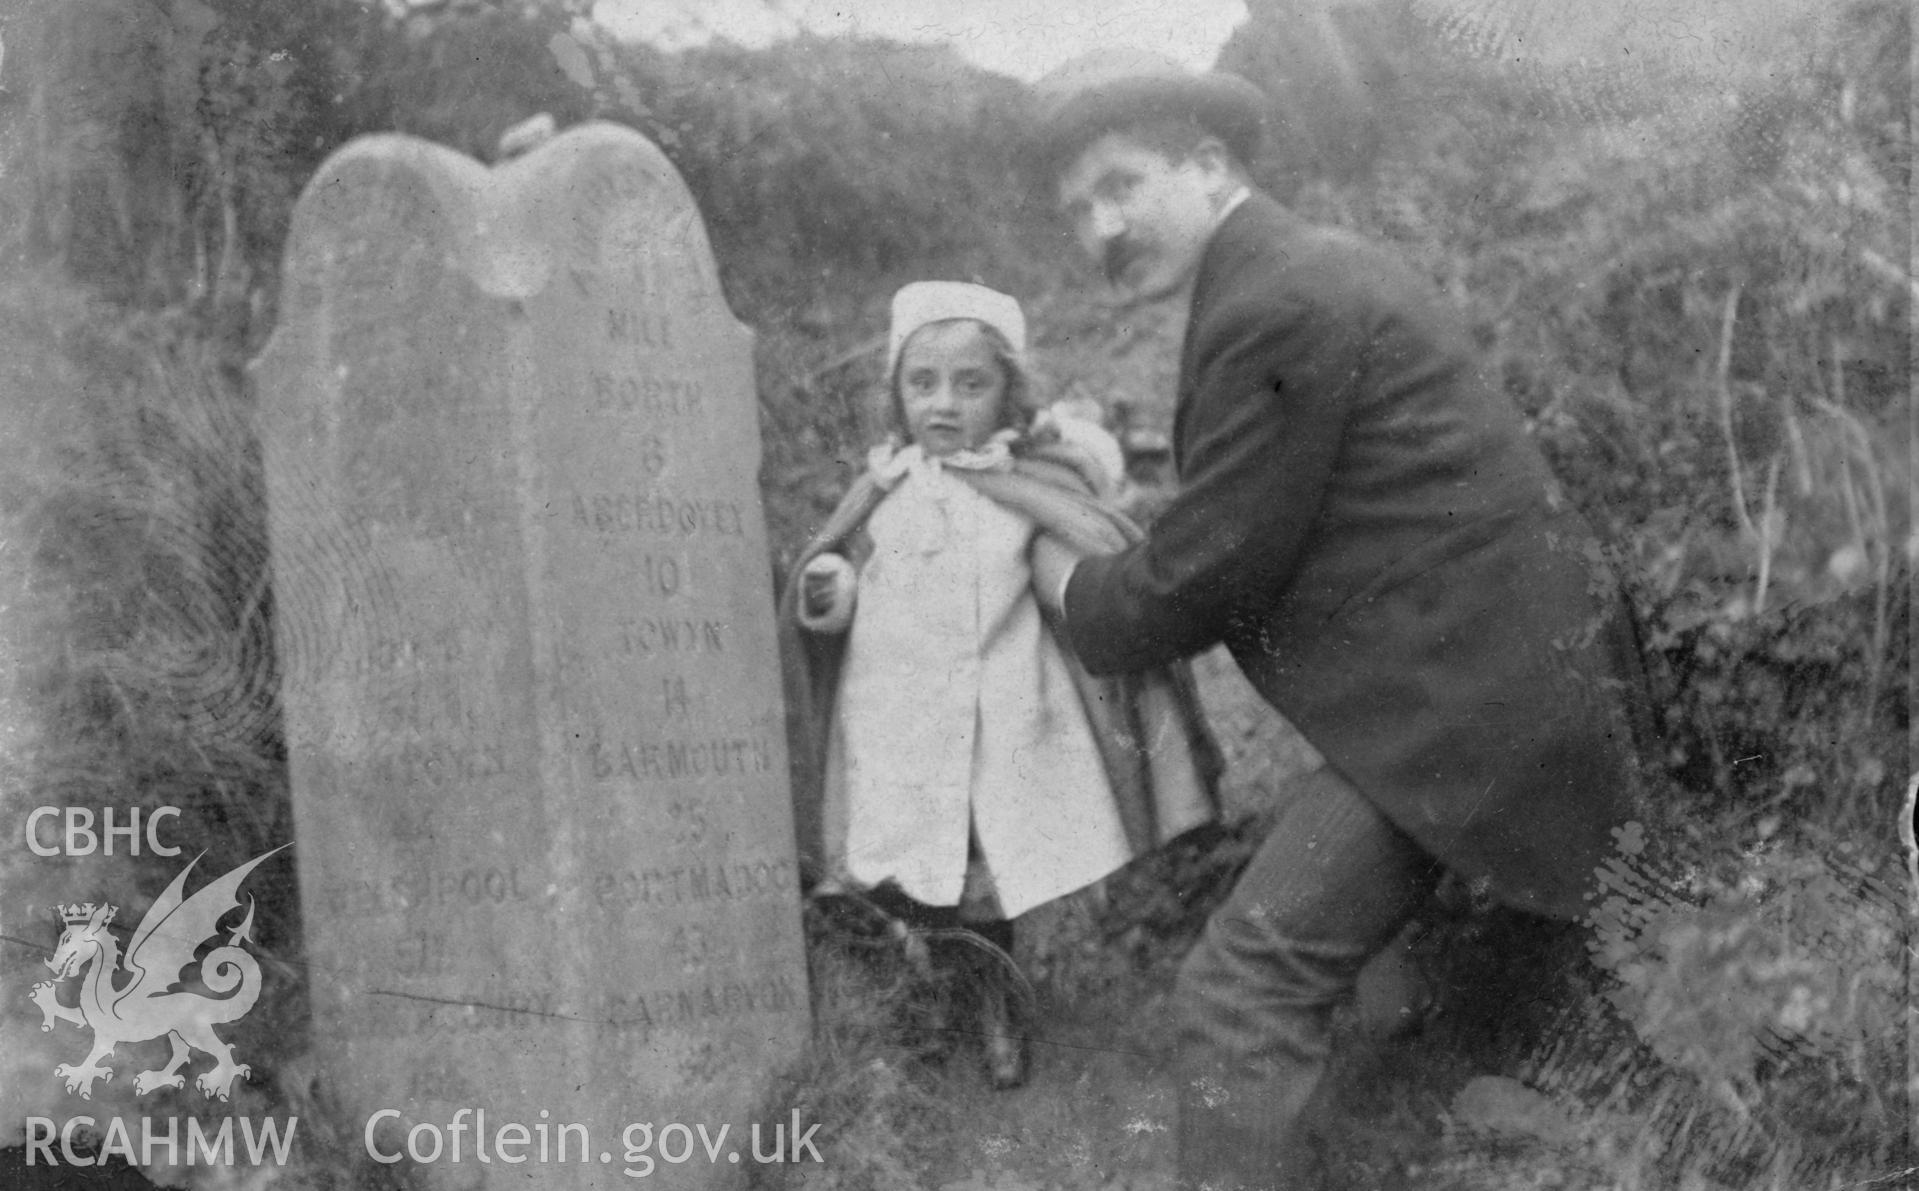 "1904". Photo of an adult and child standing by a milestone. Digitised from a photograph album showing views of Aberystwyth and District, produced by David John Saer, school teacher of Aberystwyth. Loaned for copying by Dr Alan Chamberlain.